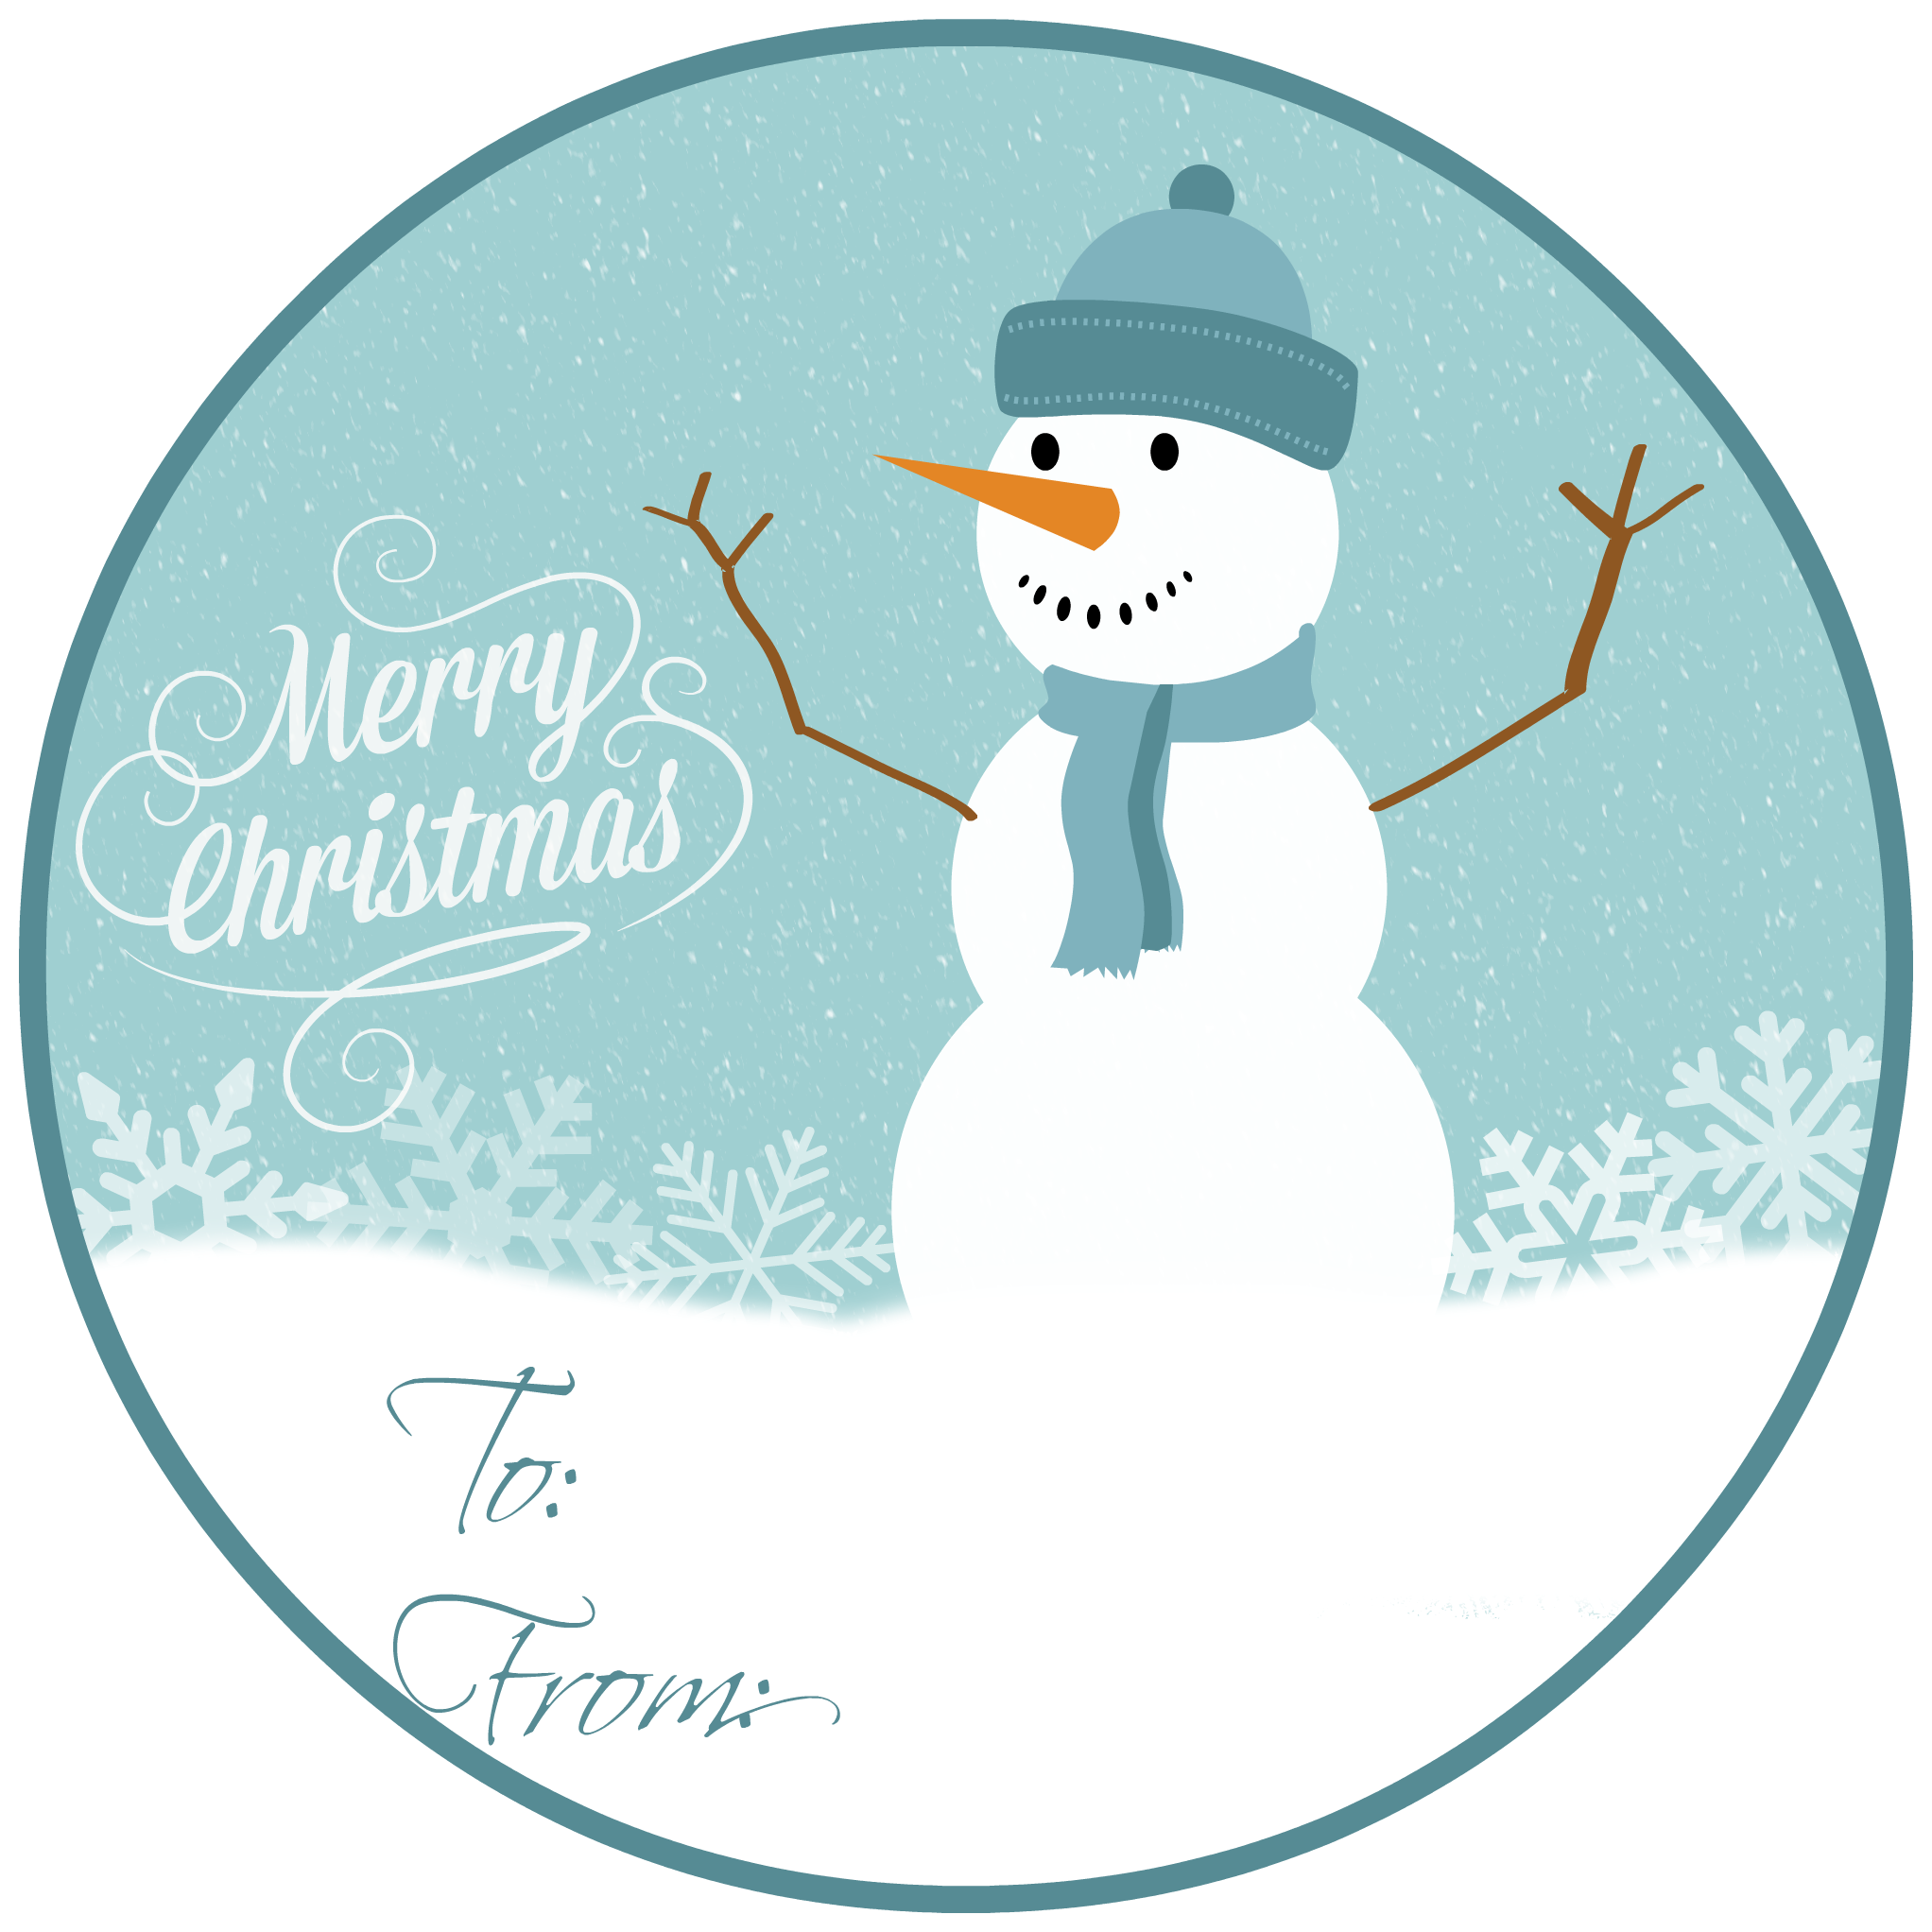 6-best-images-of-snowman-gift-tags-printable-snowman-gift-tags-free